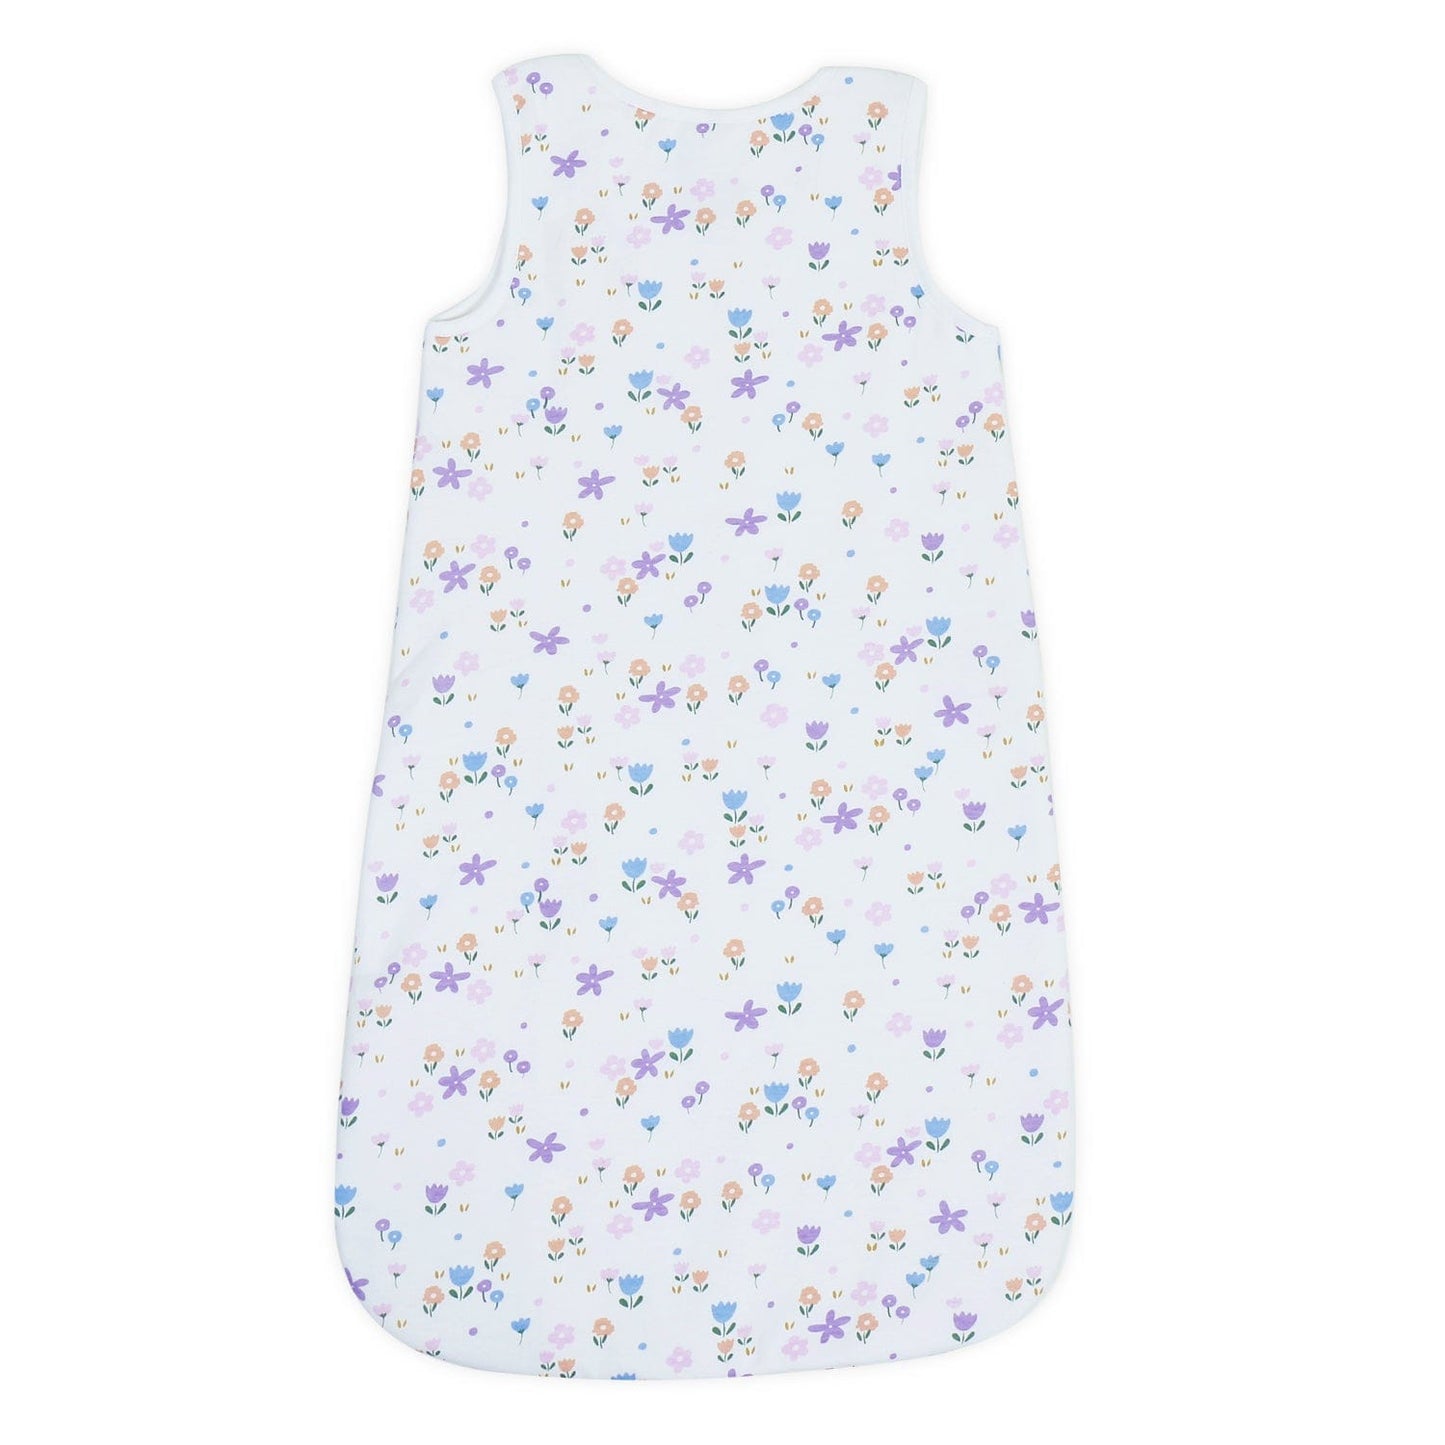 Dreamsack Cotton Sleep Sack, Quilted Layer, Size (6+ months), TOG 1.5, Ditsy Floral